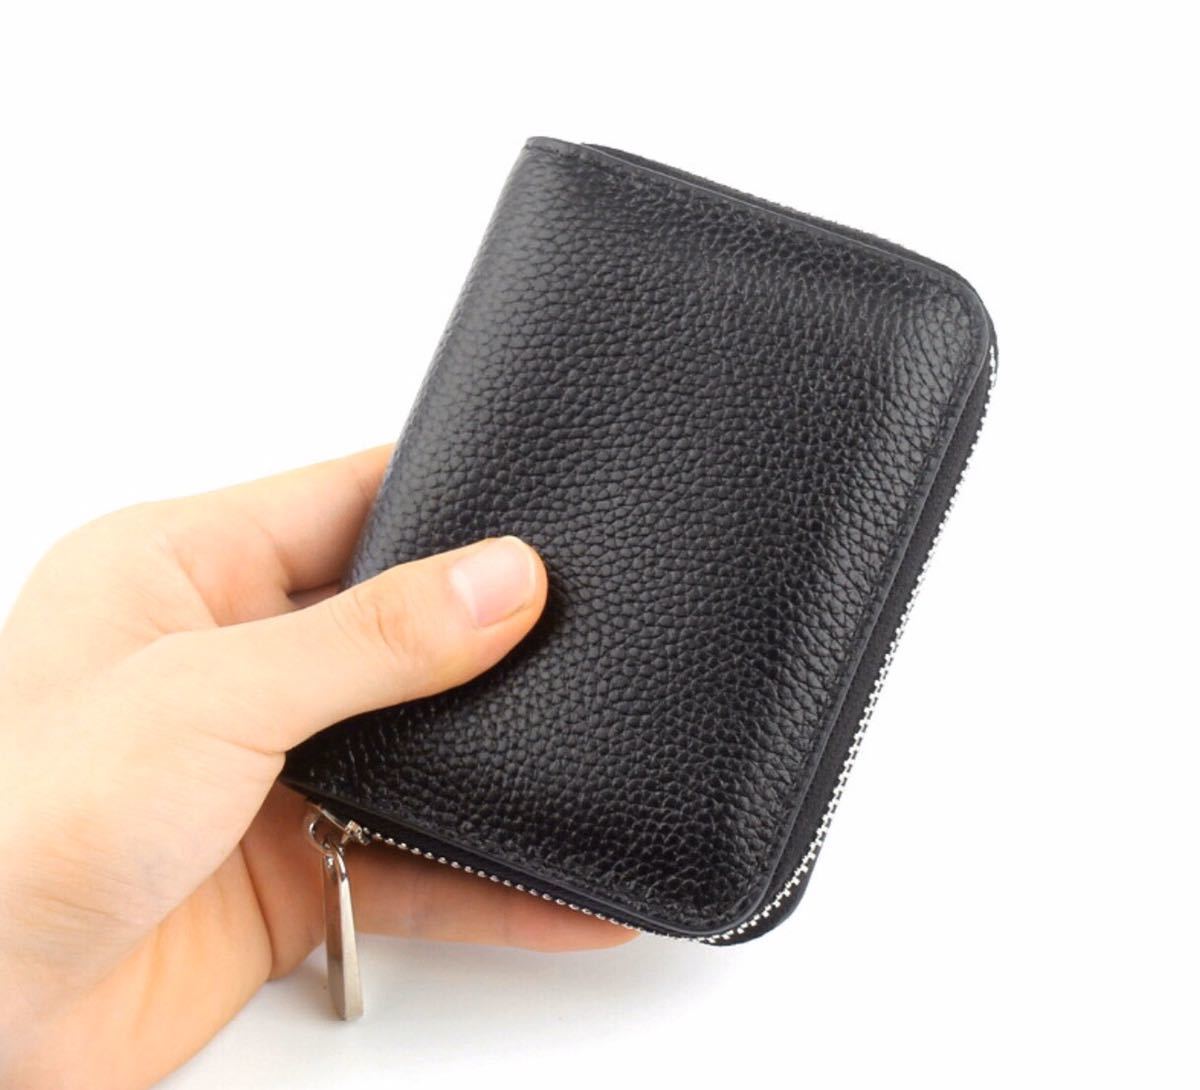  limitation black Italian leather cow leather original leather man and woman use handmade super popular round fastener popular compact purse change purse . equipped key ring attaching popular 